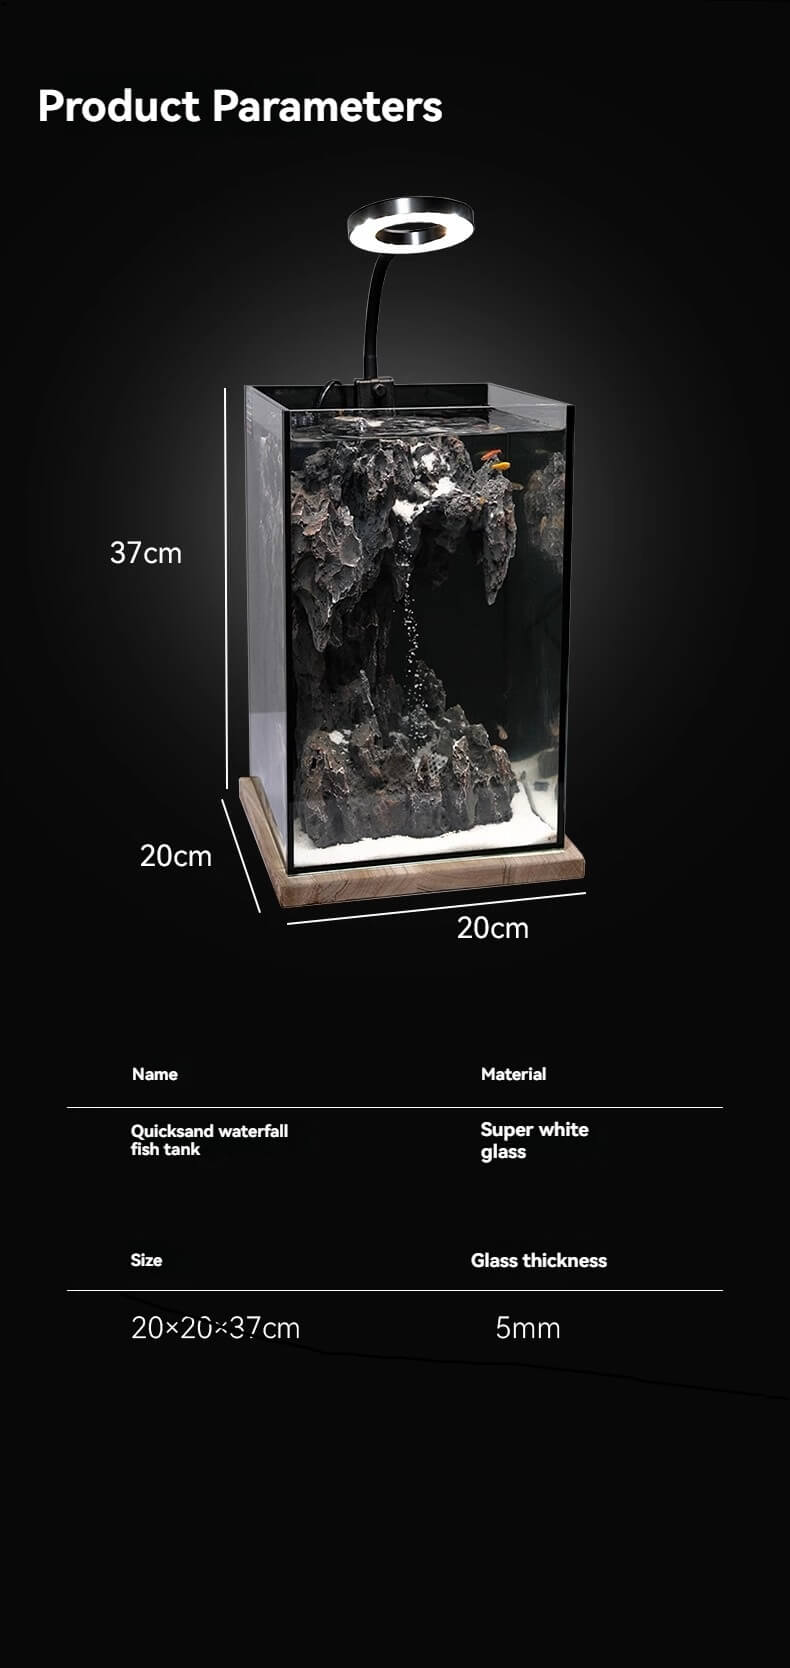 Eco-Friendly Micro Landscape Fish Tank with Quicksand Waterfall